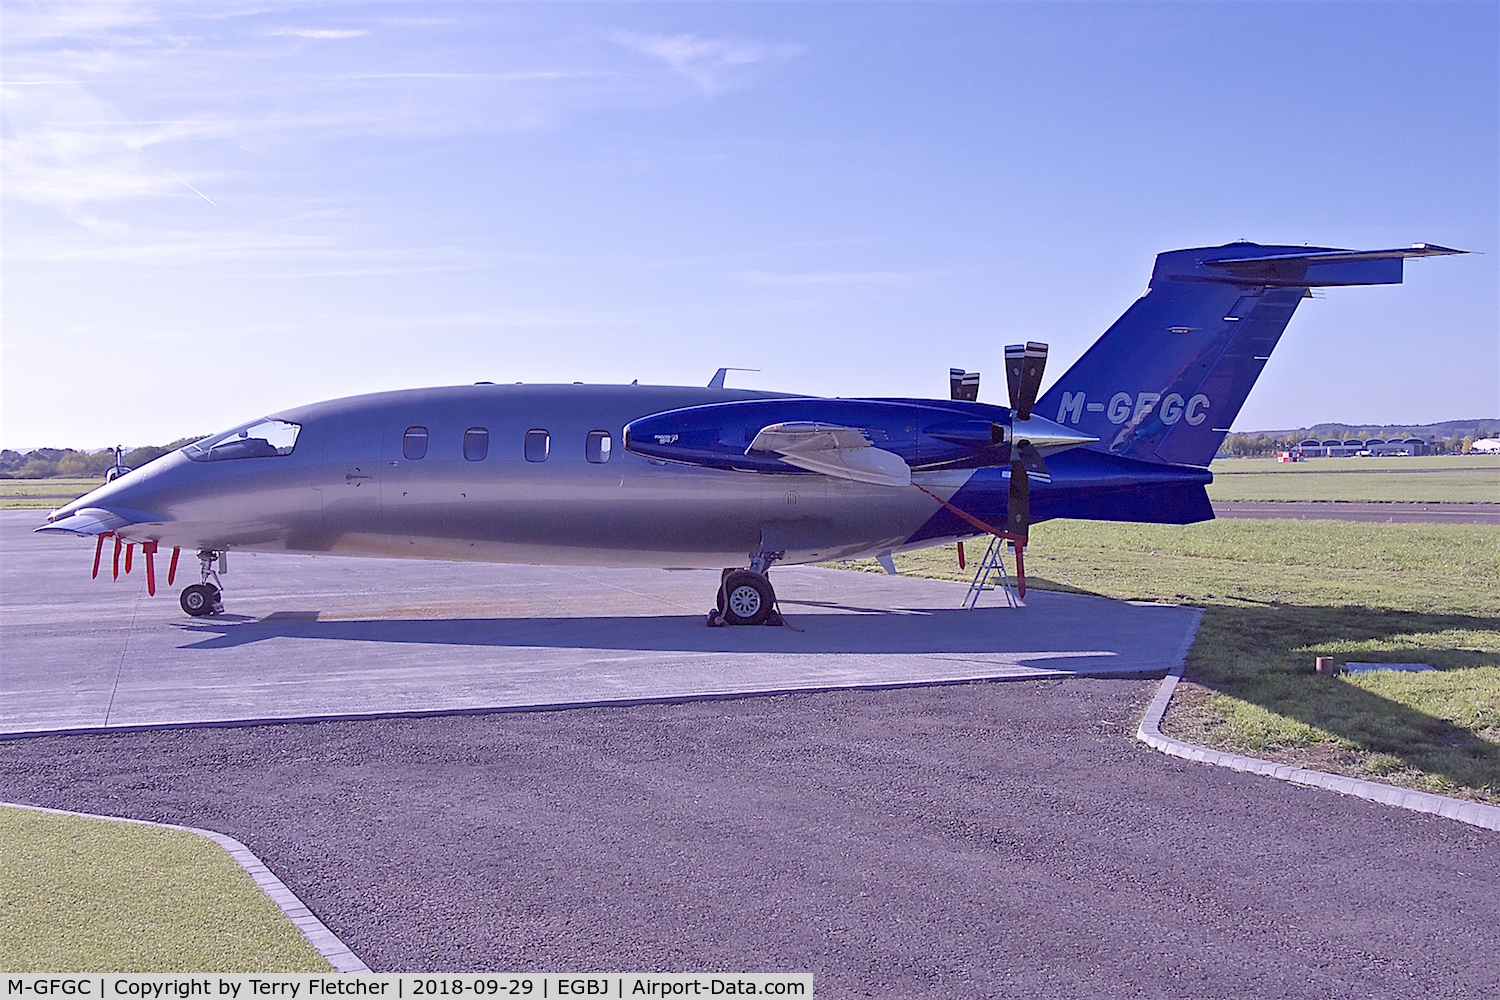 M-GFGC, 2012 Piaggio P-180 Avanti II C/N 1231, At Staverton Airport - formerly on the Chinese Register as B-8312